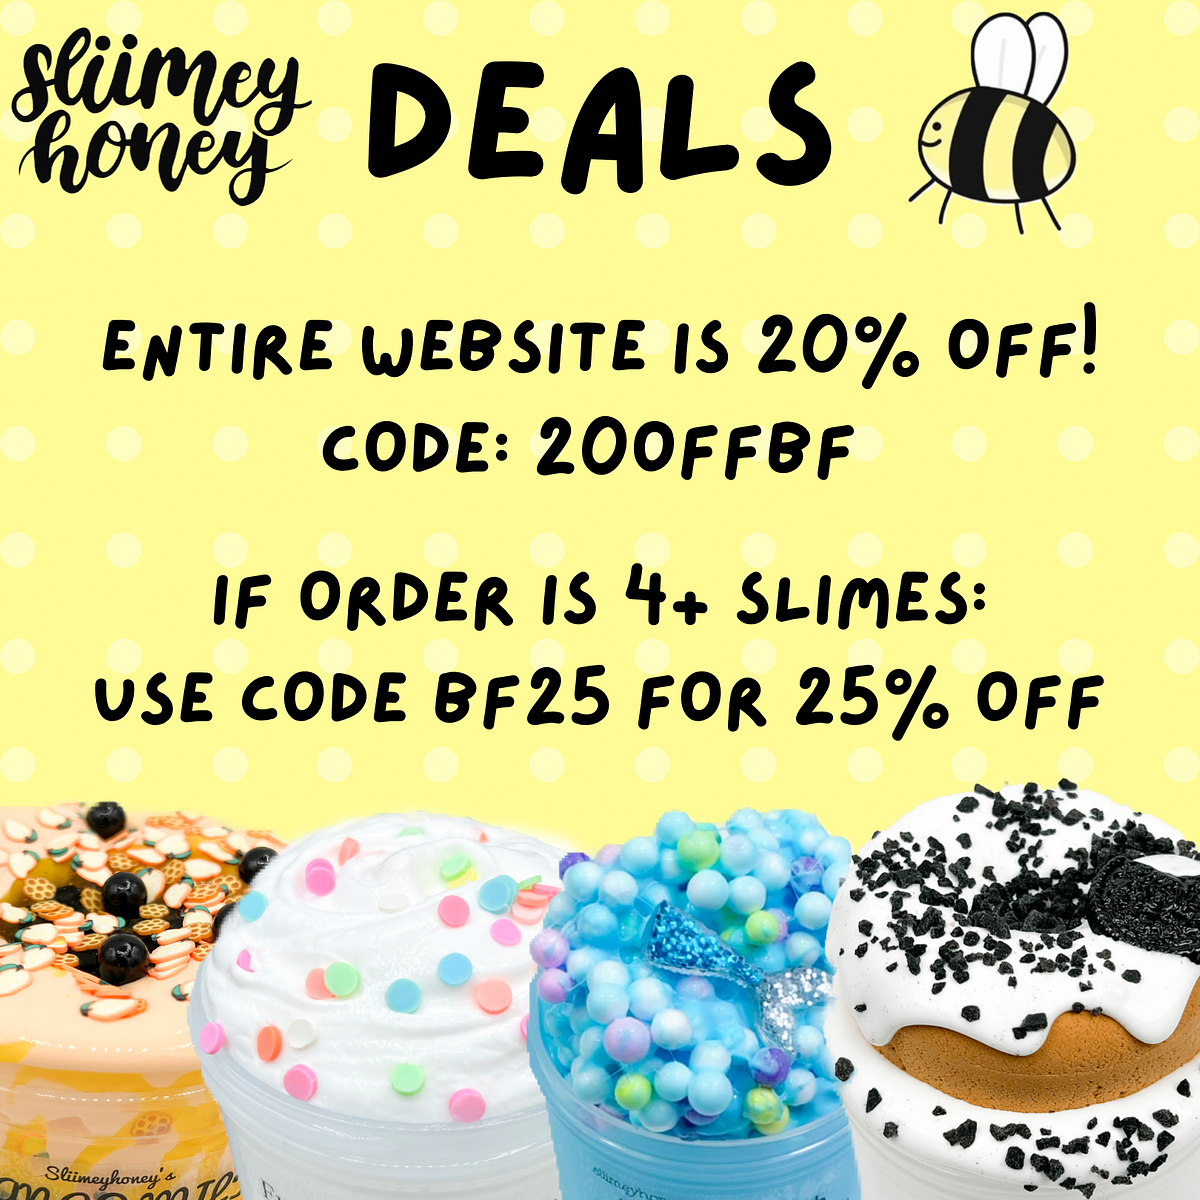 Y DEALS b ENTIRE WEBSITE 1S 20% OFF! CODE: 200FFBF IF ORDER 1S % SLIMES: USE CODE BF25 FOR 25% OFF 